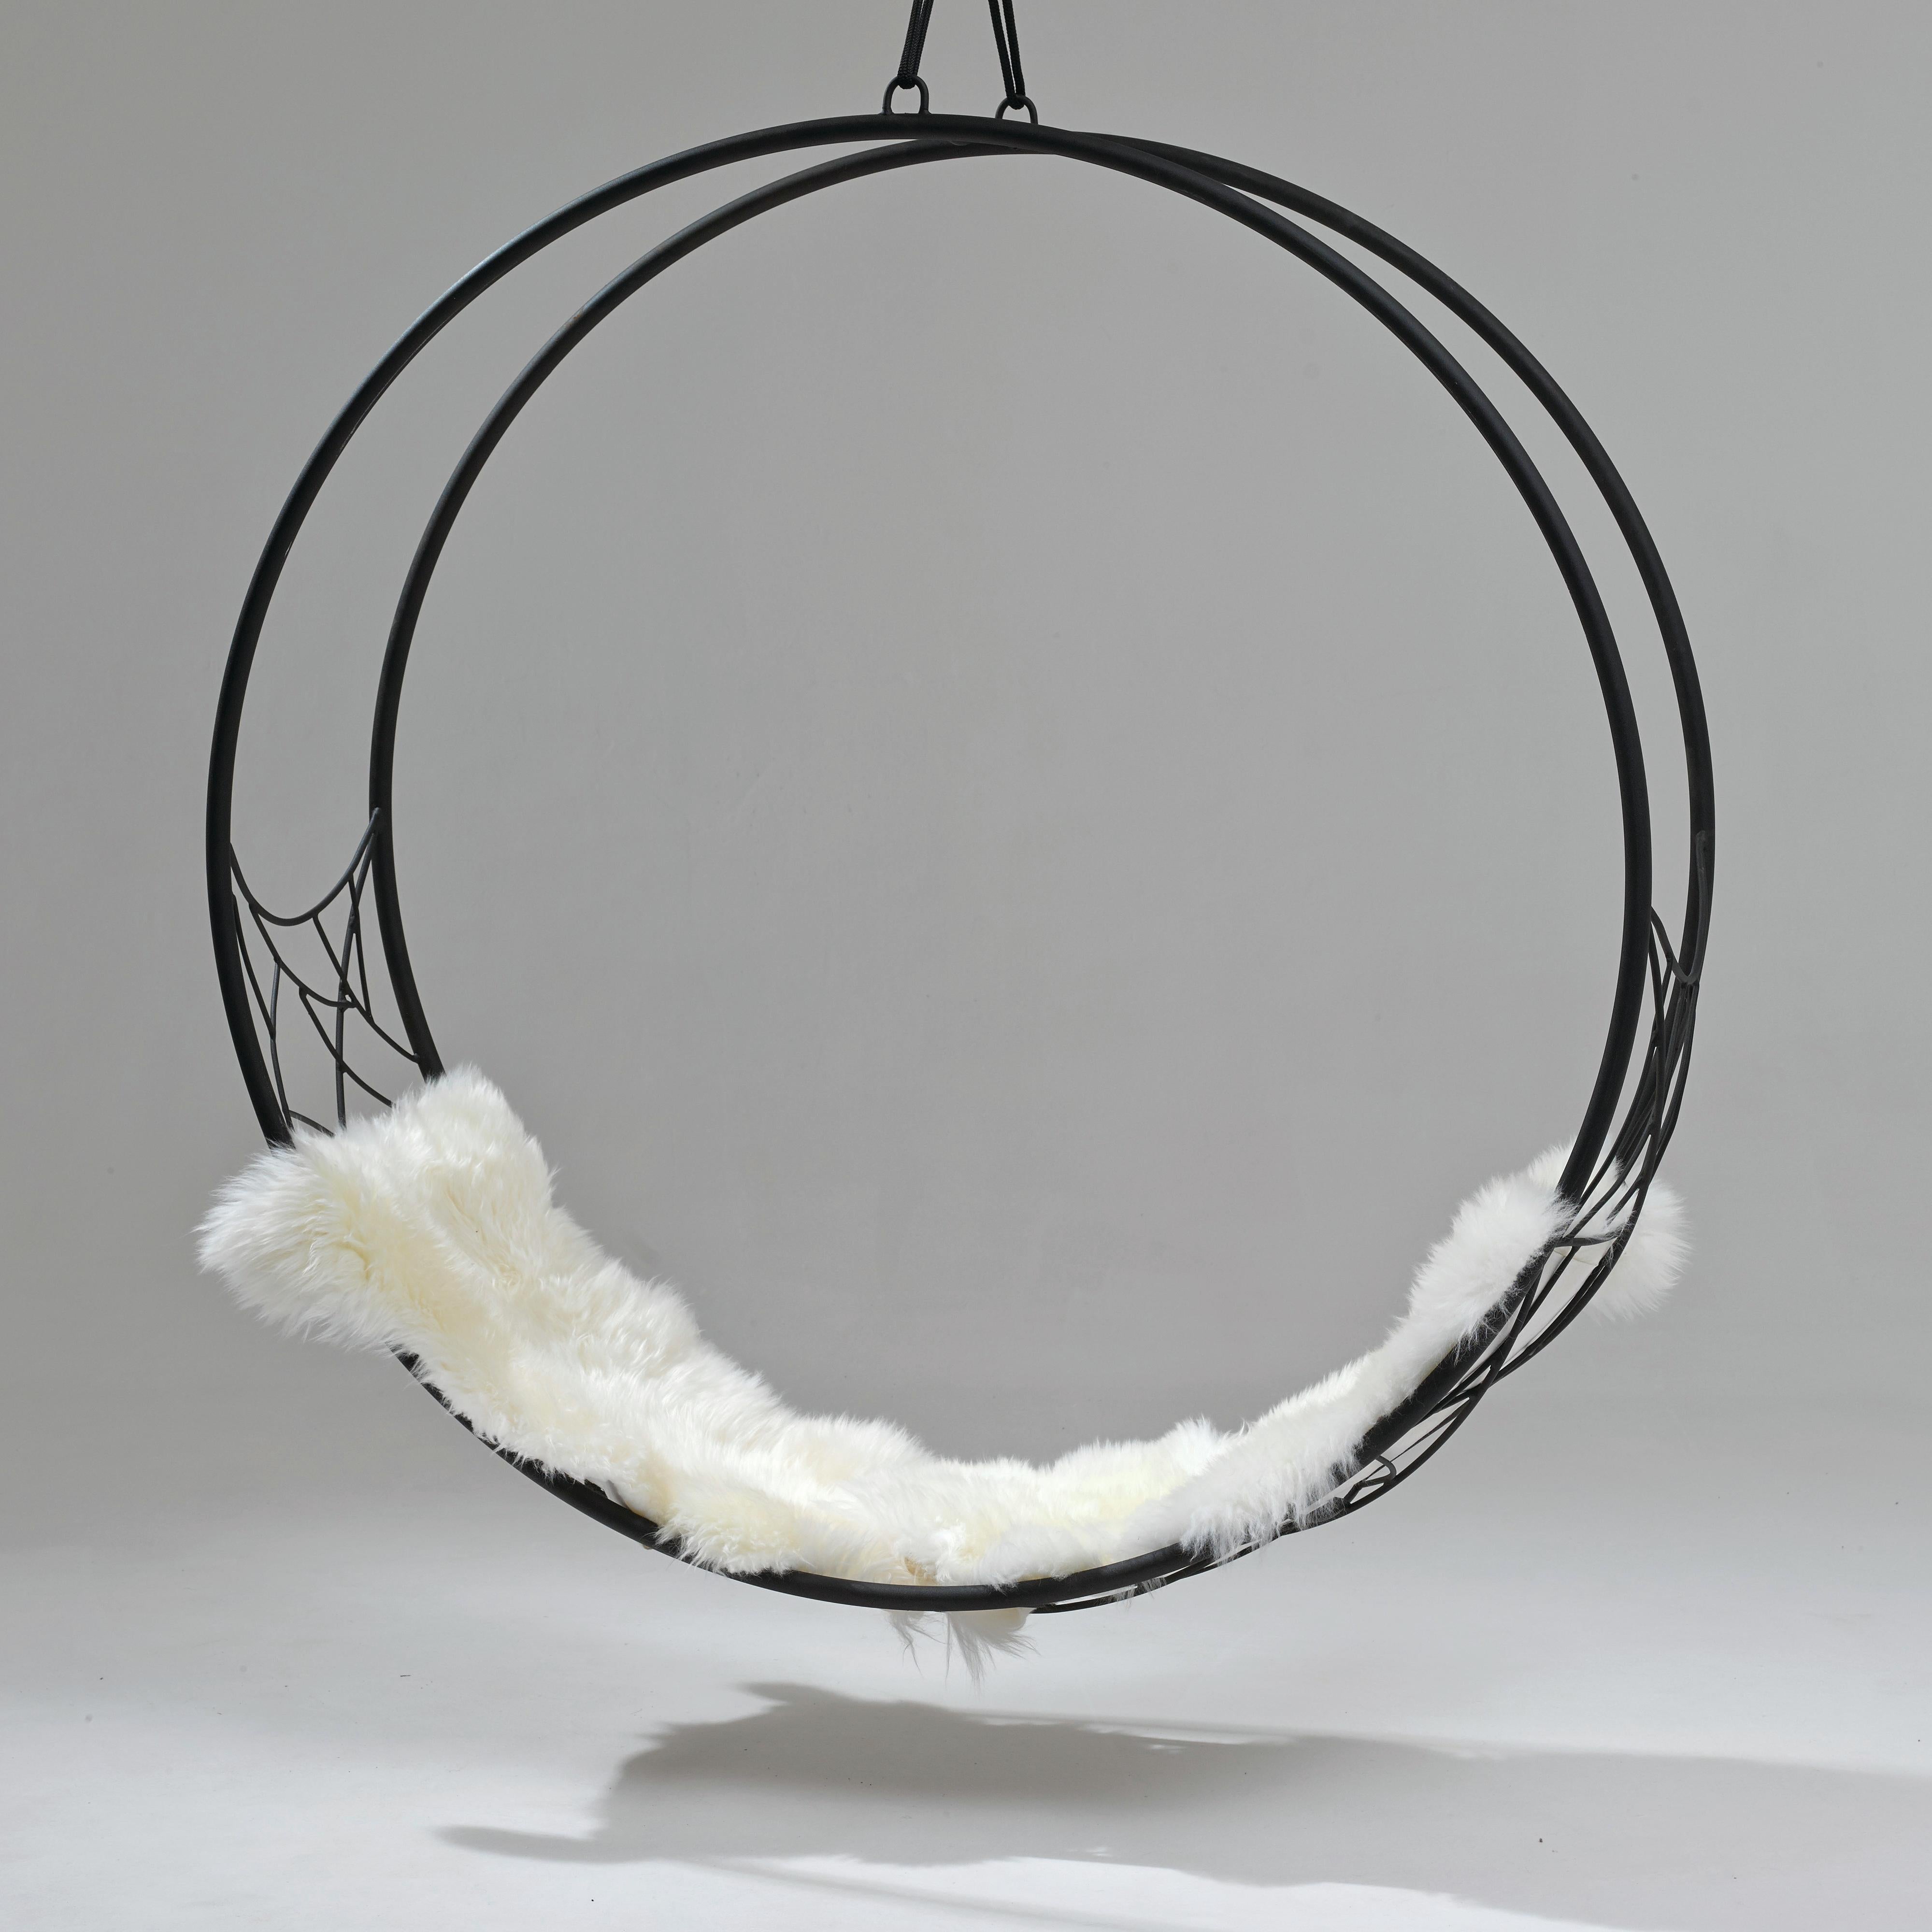 Contemporary Modern Hanging Garden Chair For Sale